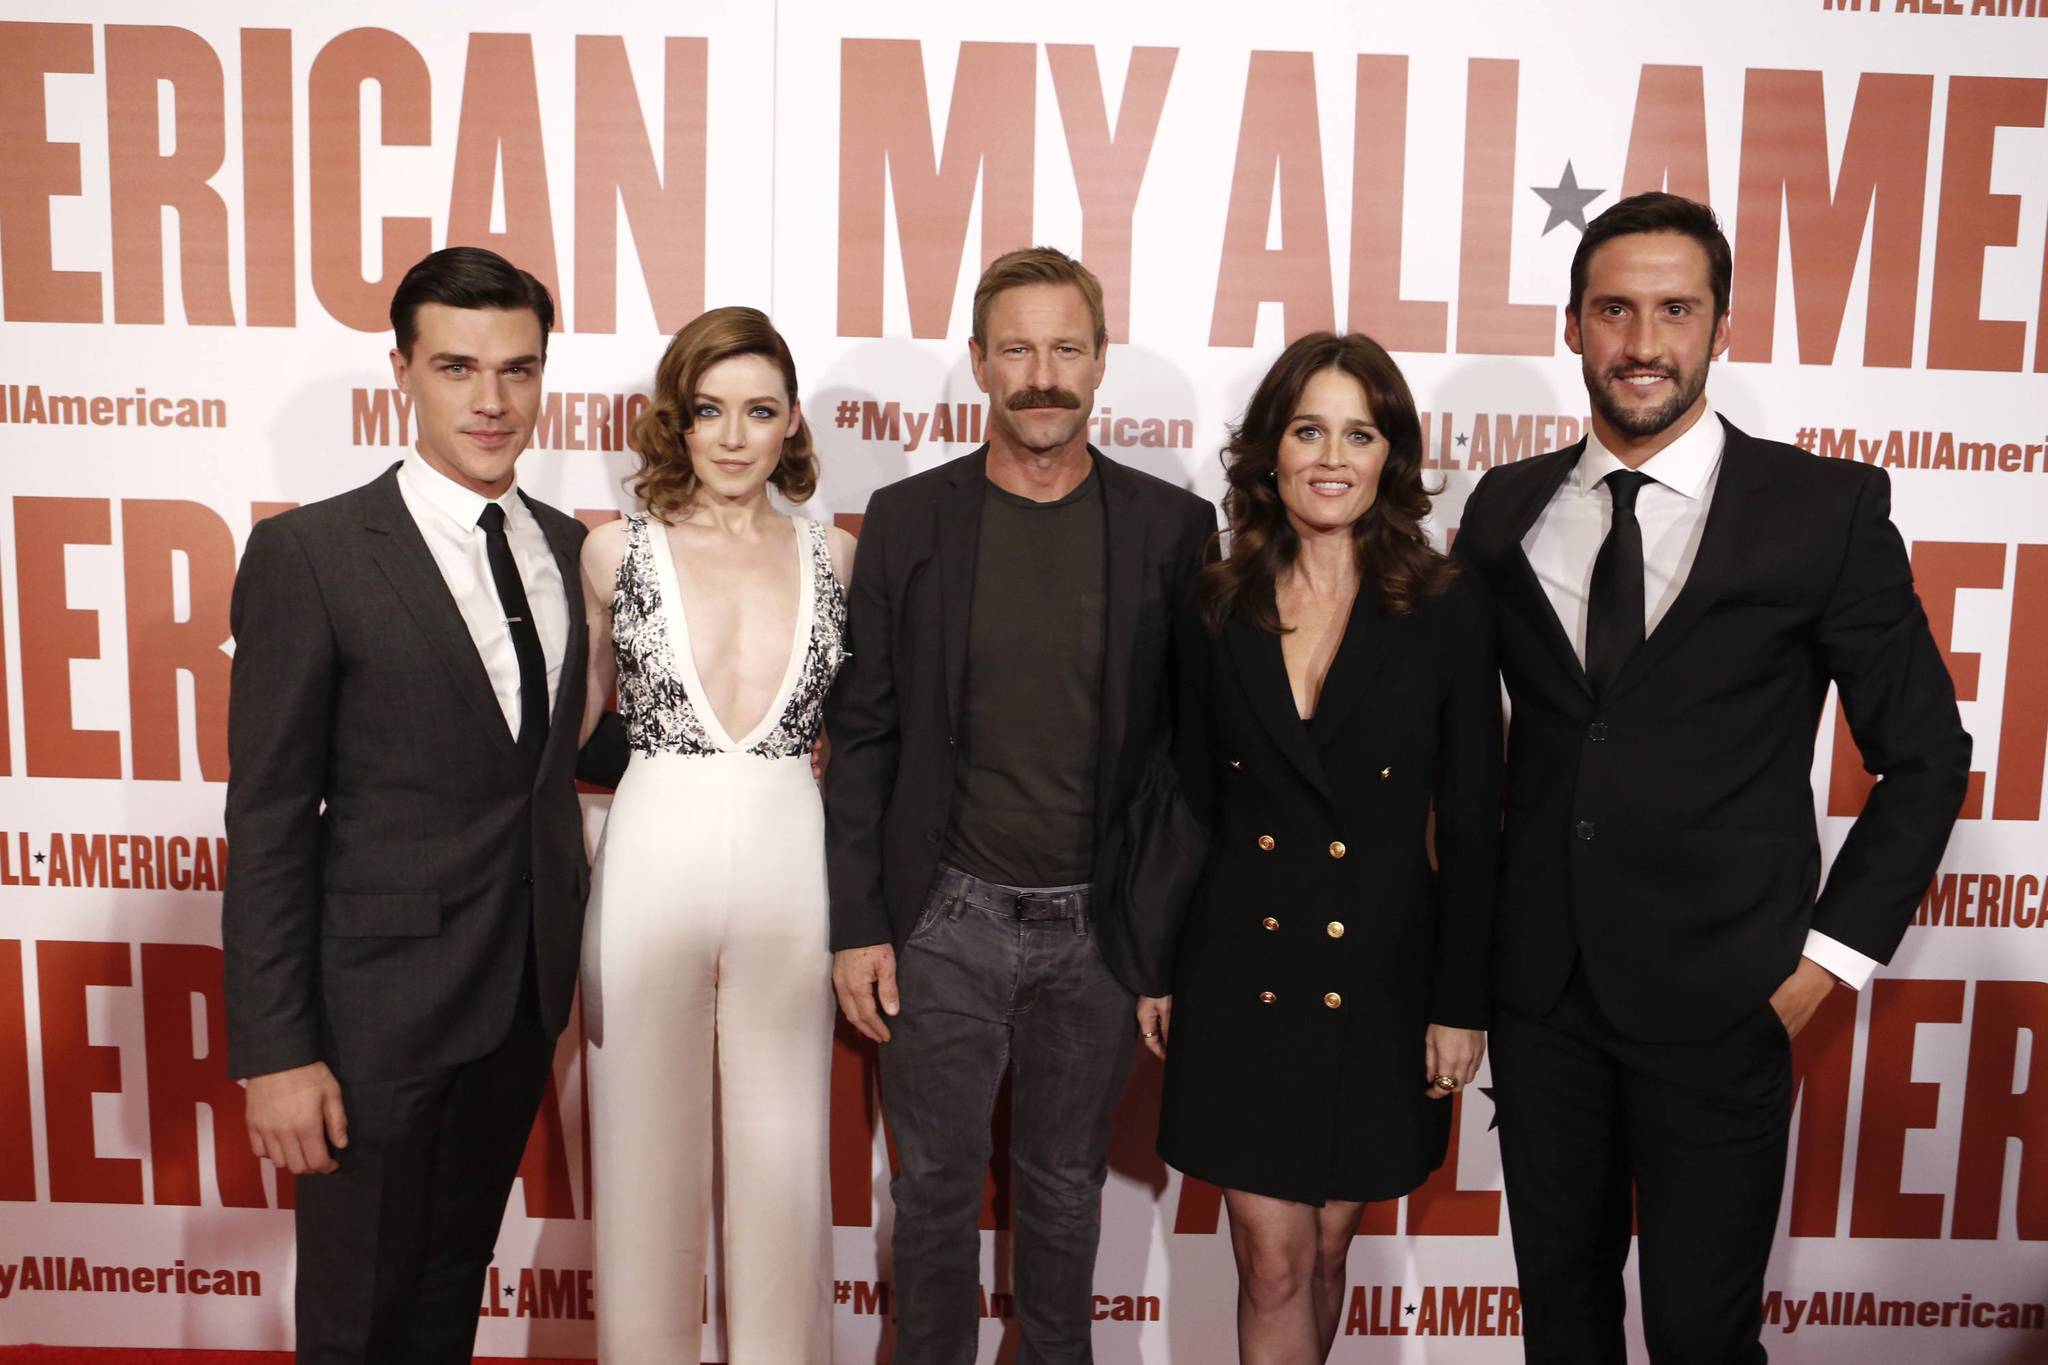 Robin Tunney, Aaron Eckhart, Sarah Bolger, Finn Wittrock and Juston Street at event of My All American (2015)